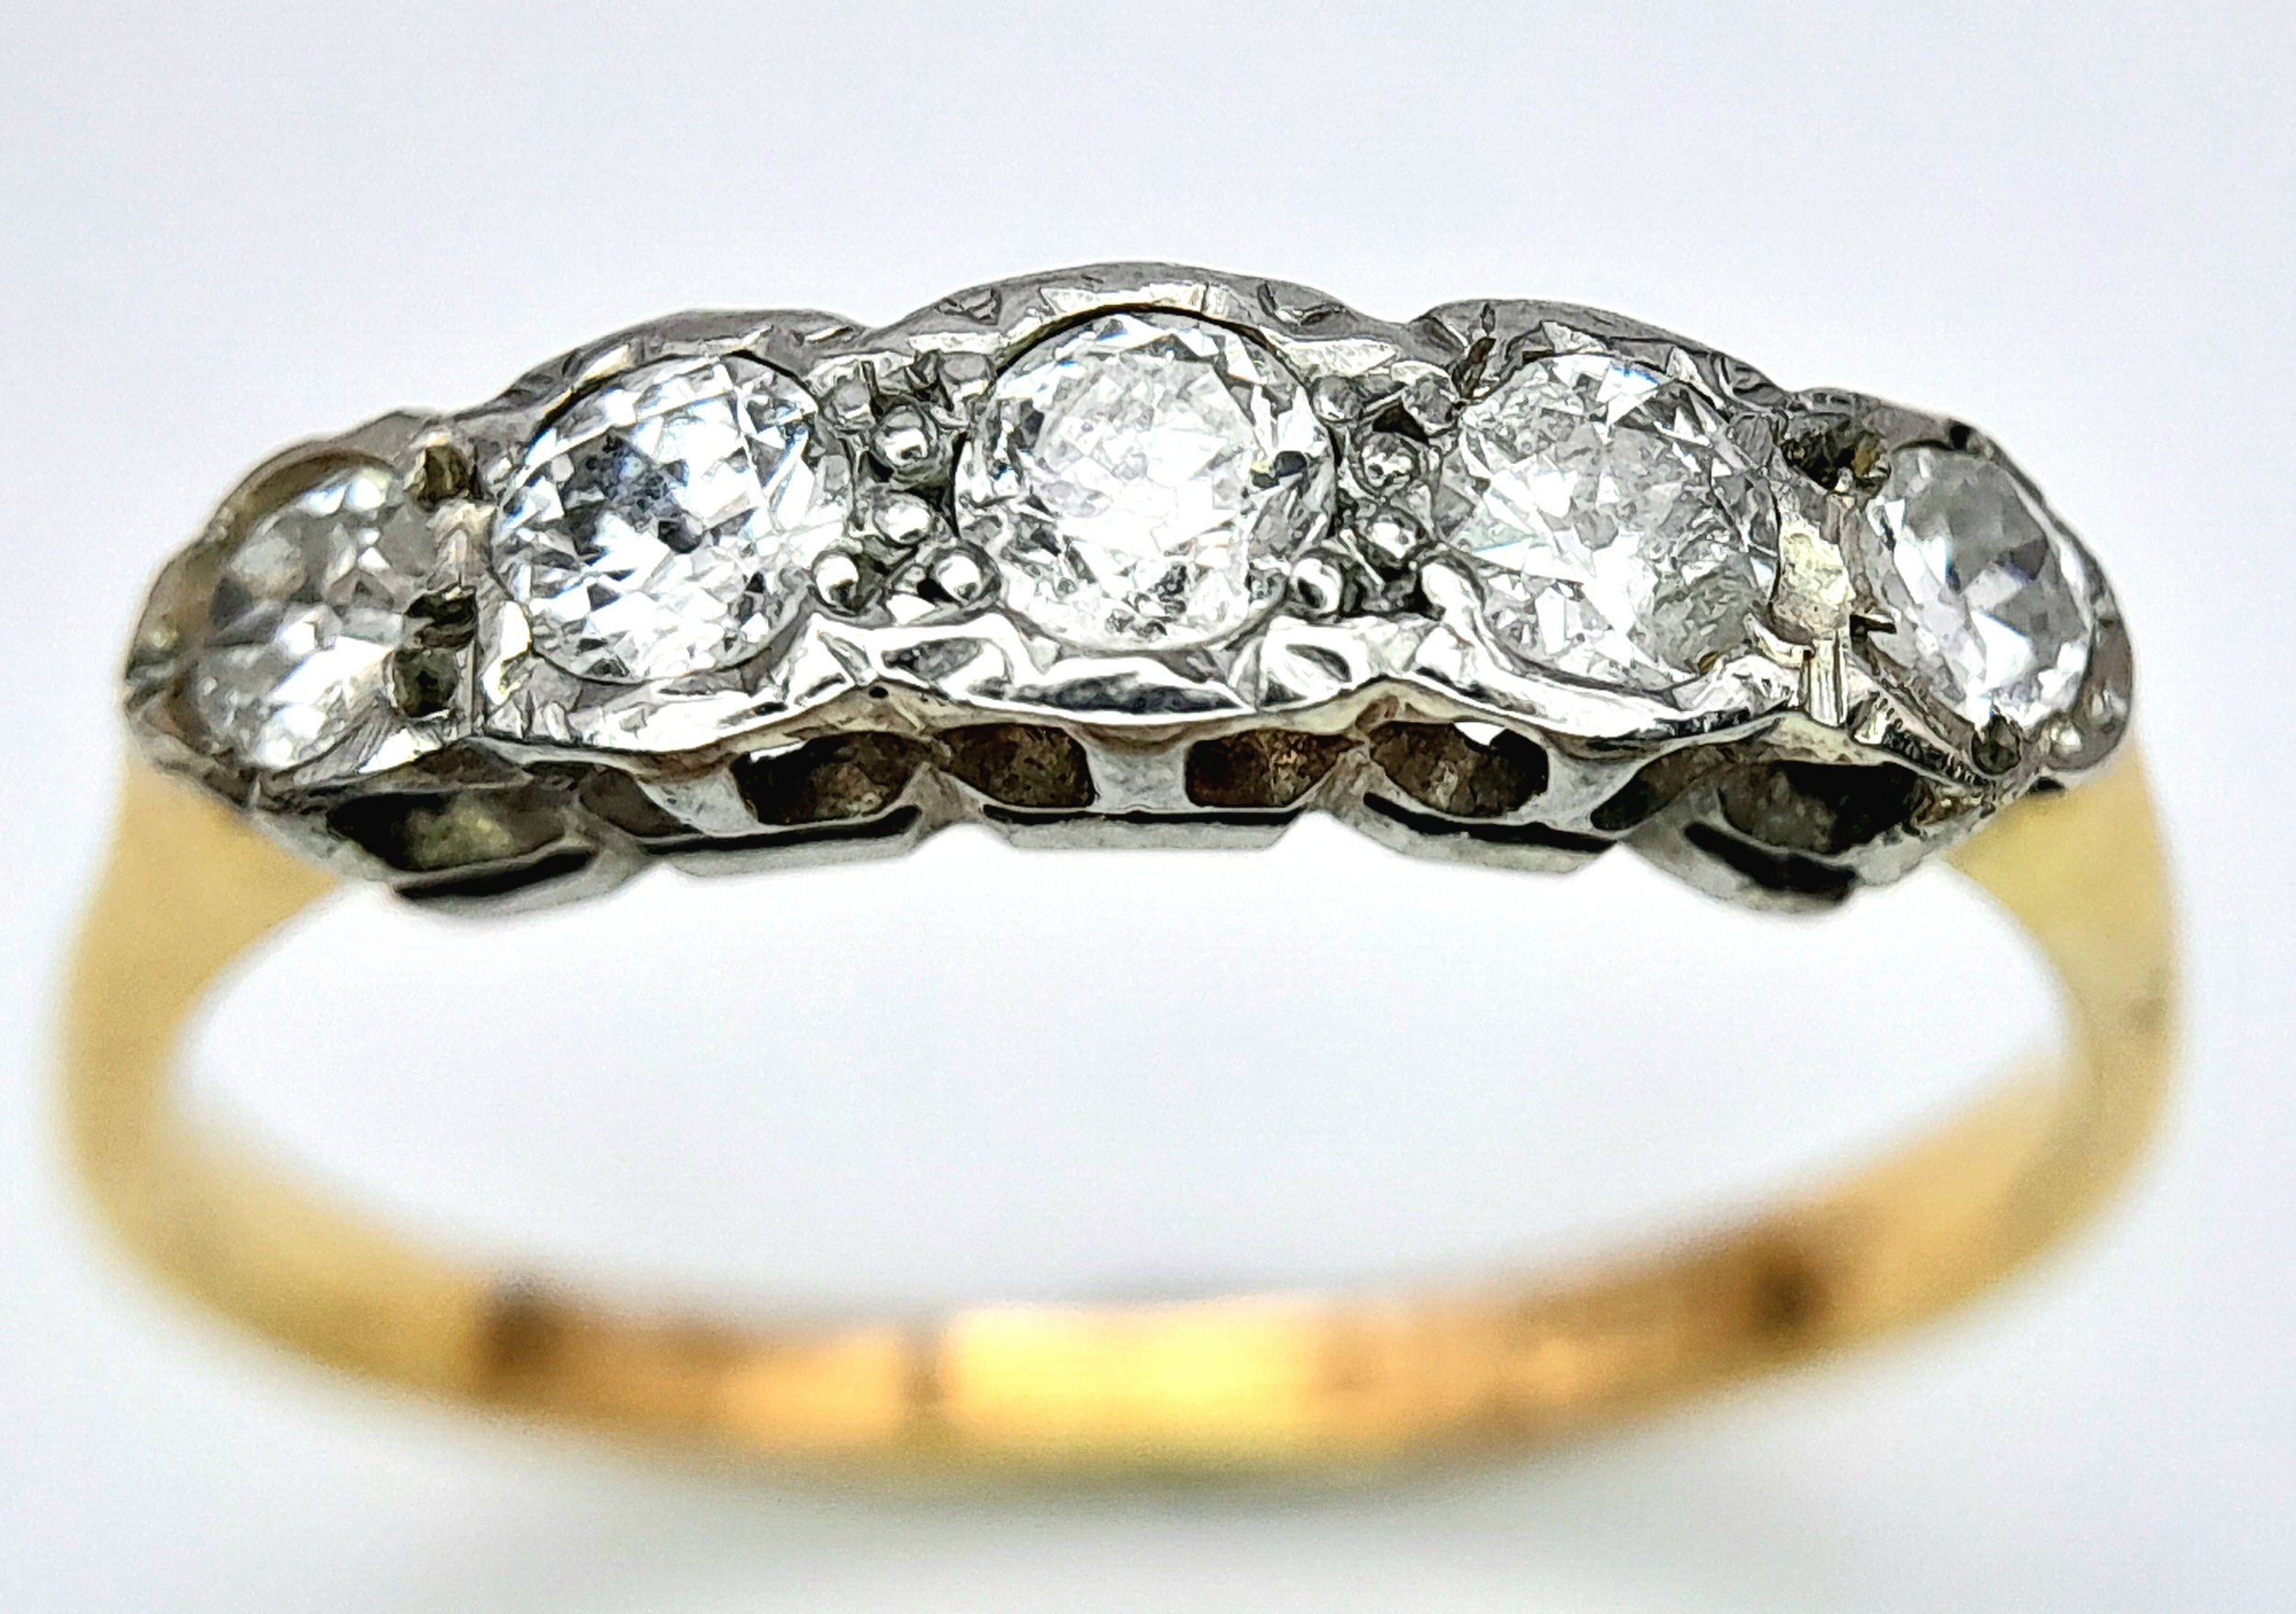 AN 18K YELLOW GOLD AND PLATINUM VINTAGE DIAMOND 5 STONE RING. 0.40CT. 2.5G. SIZE N - Image 3 of 6